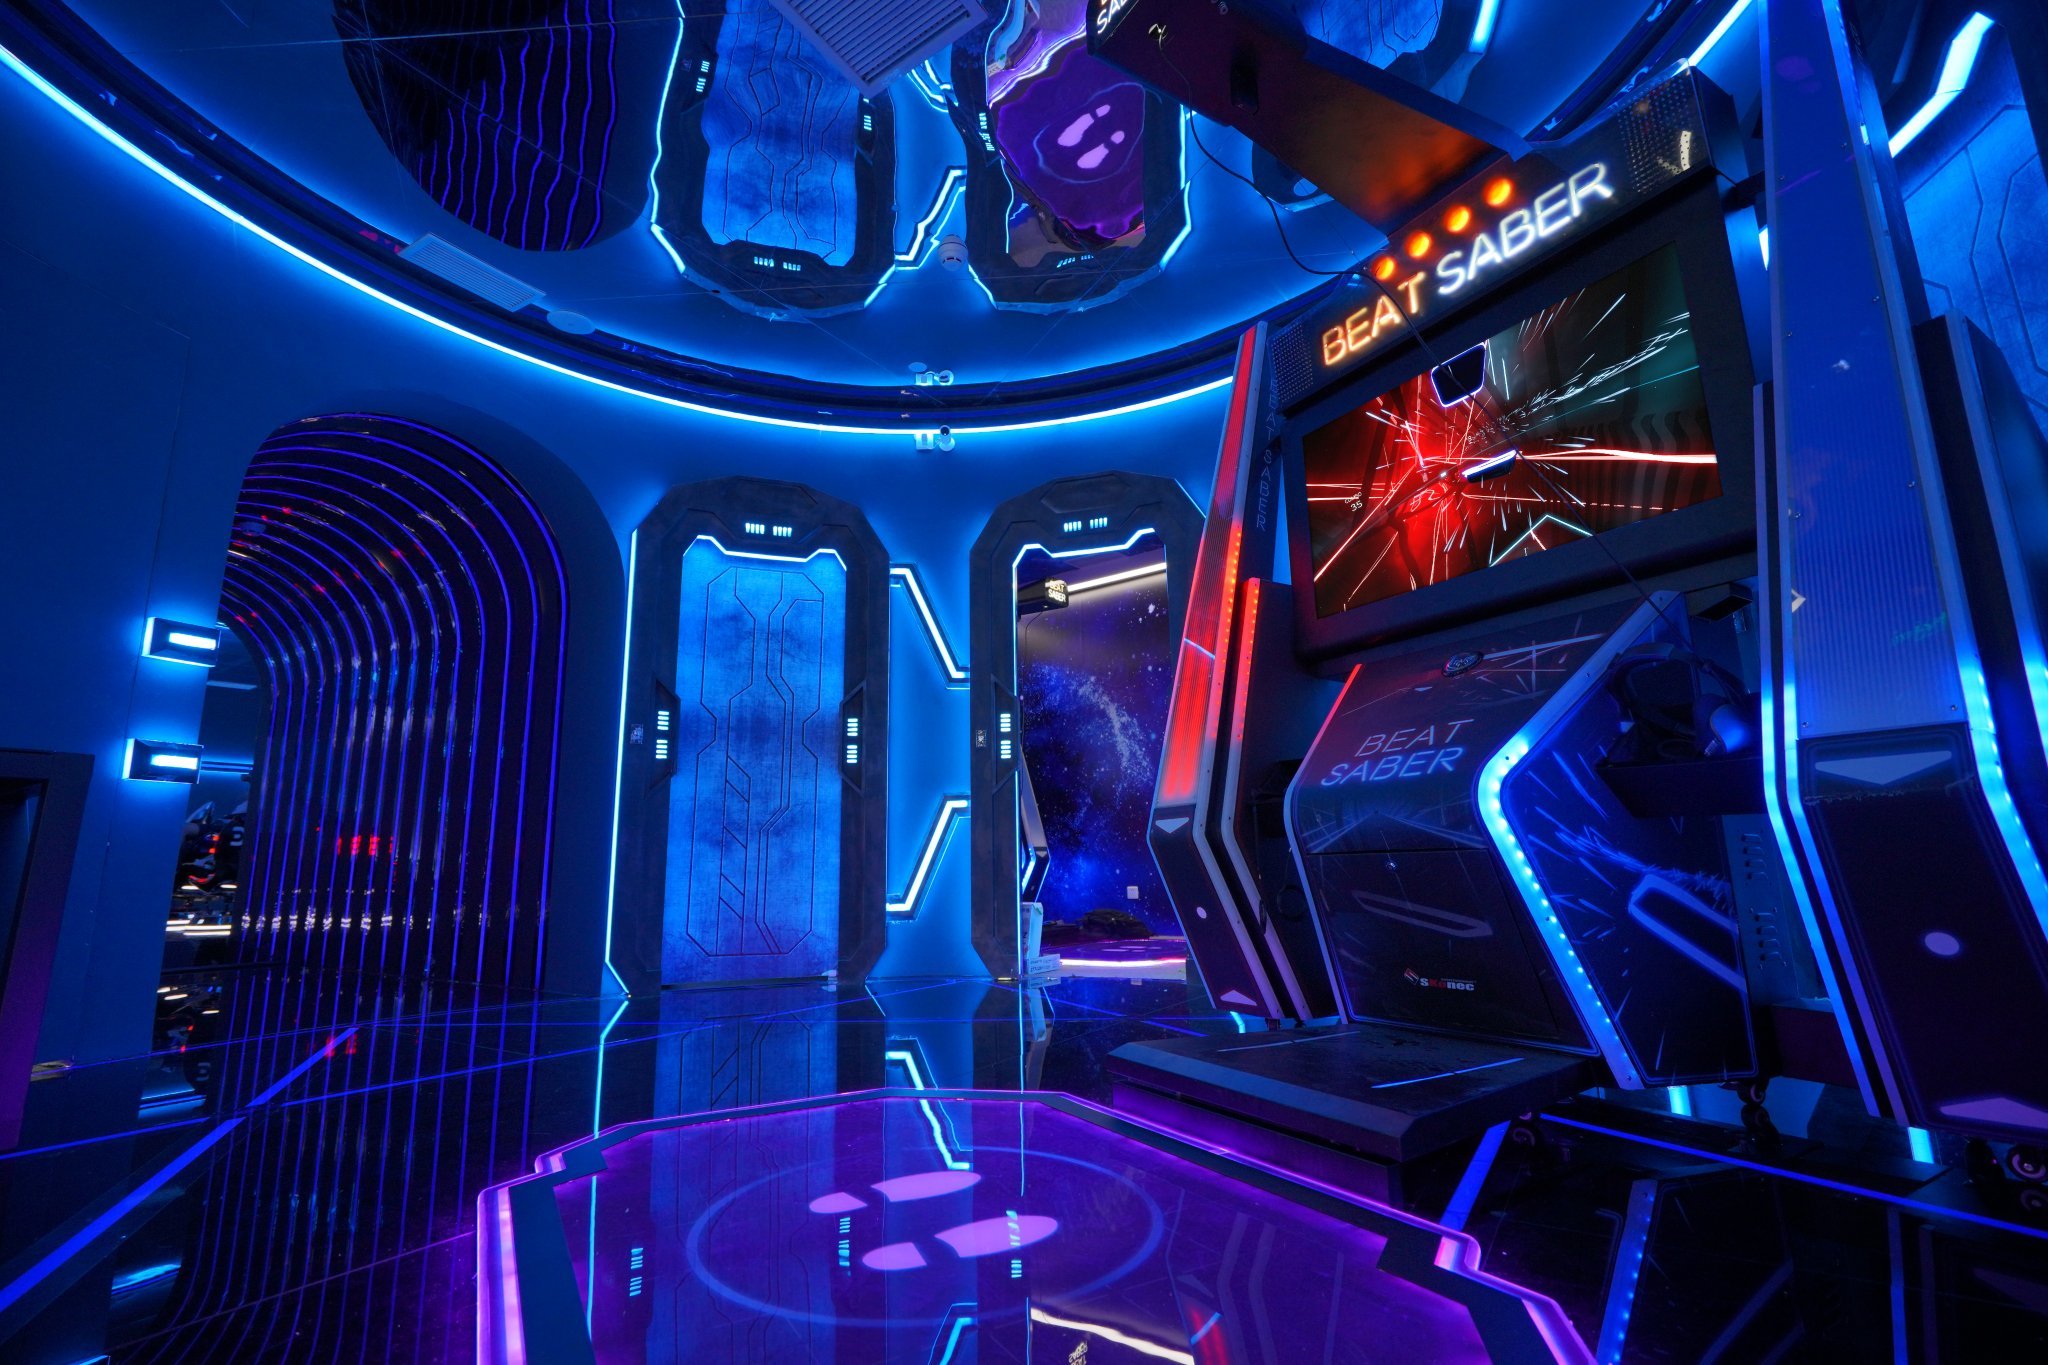 First Beat Saber VR arcade machine may use Windows Mixed Reality headset